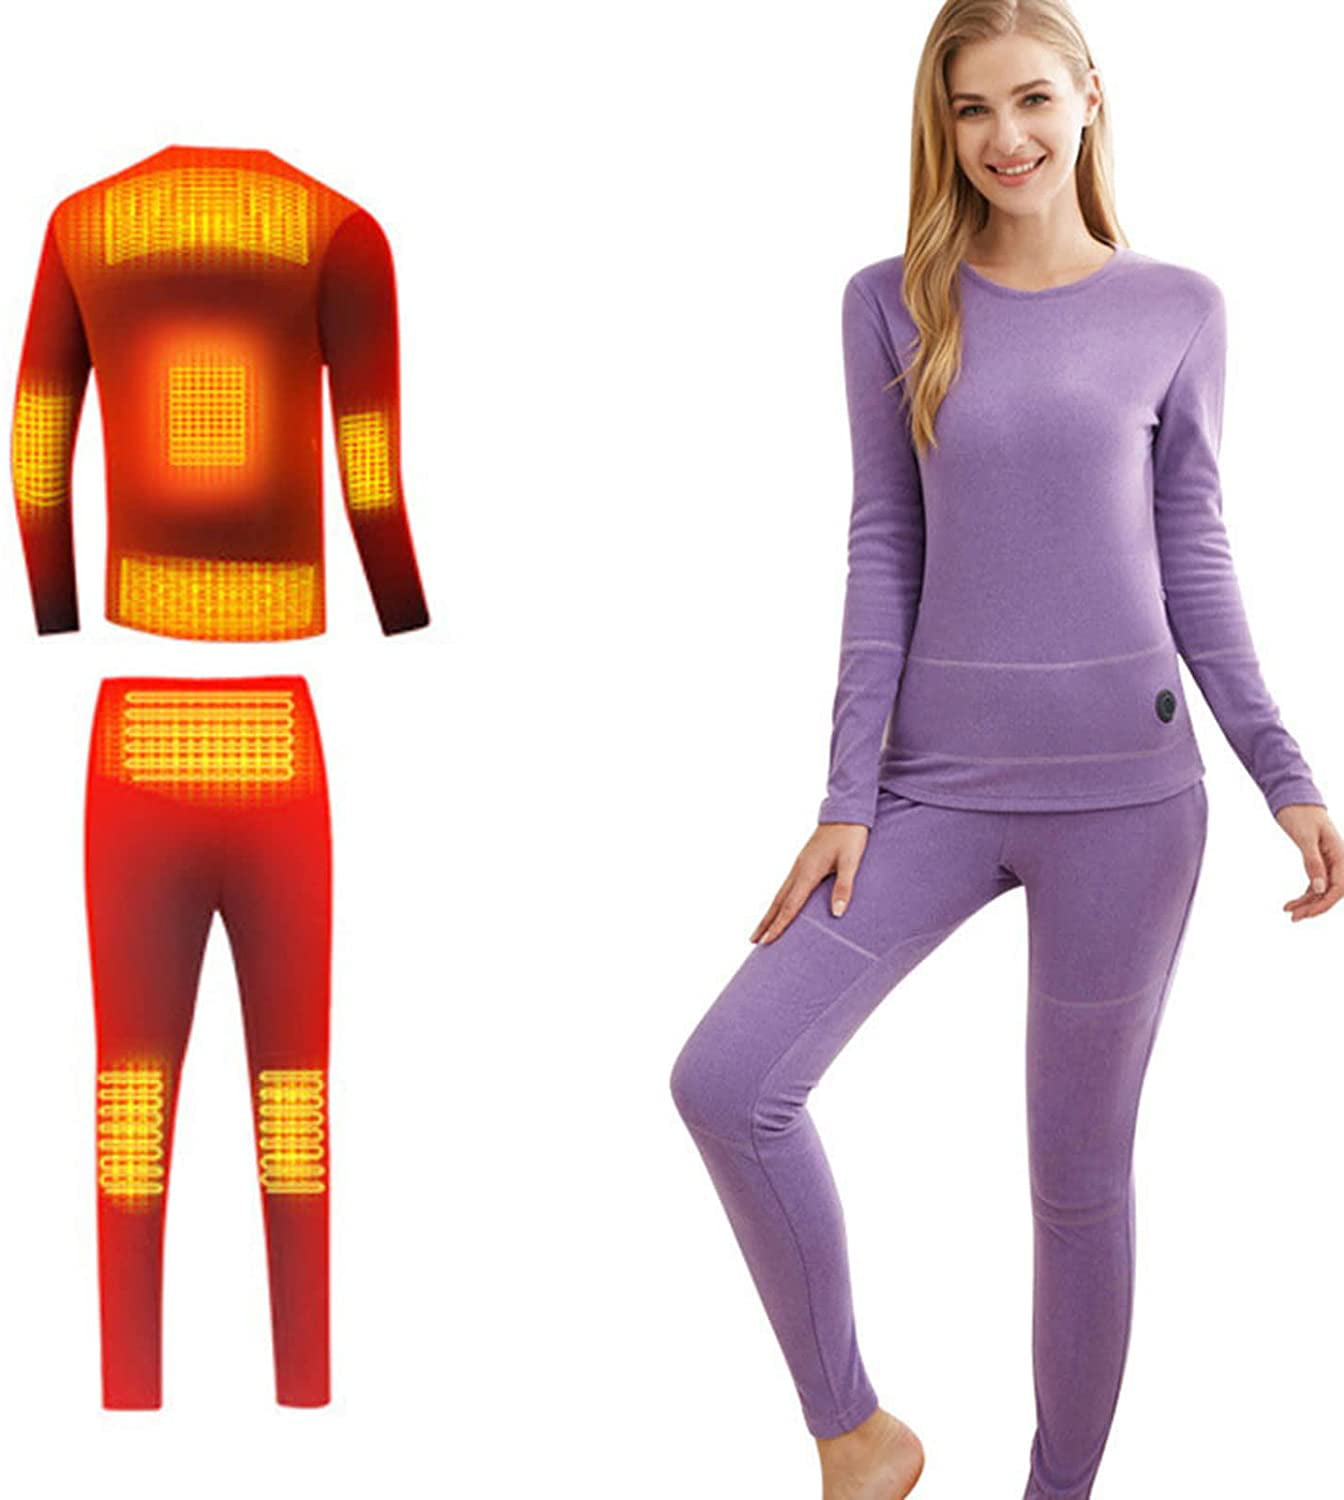 Insulated Heating Underwear Washable USB Electric Heated Thermal Long Sleeve T Shirts or Pants Smart Bluetooth Temperature Control Battery Not Included